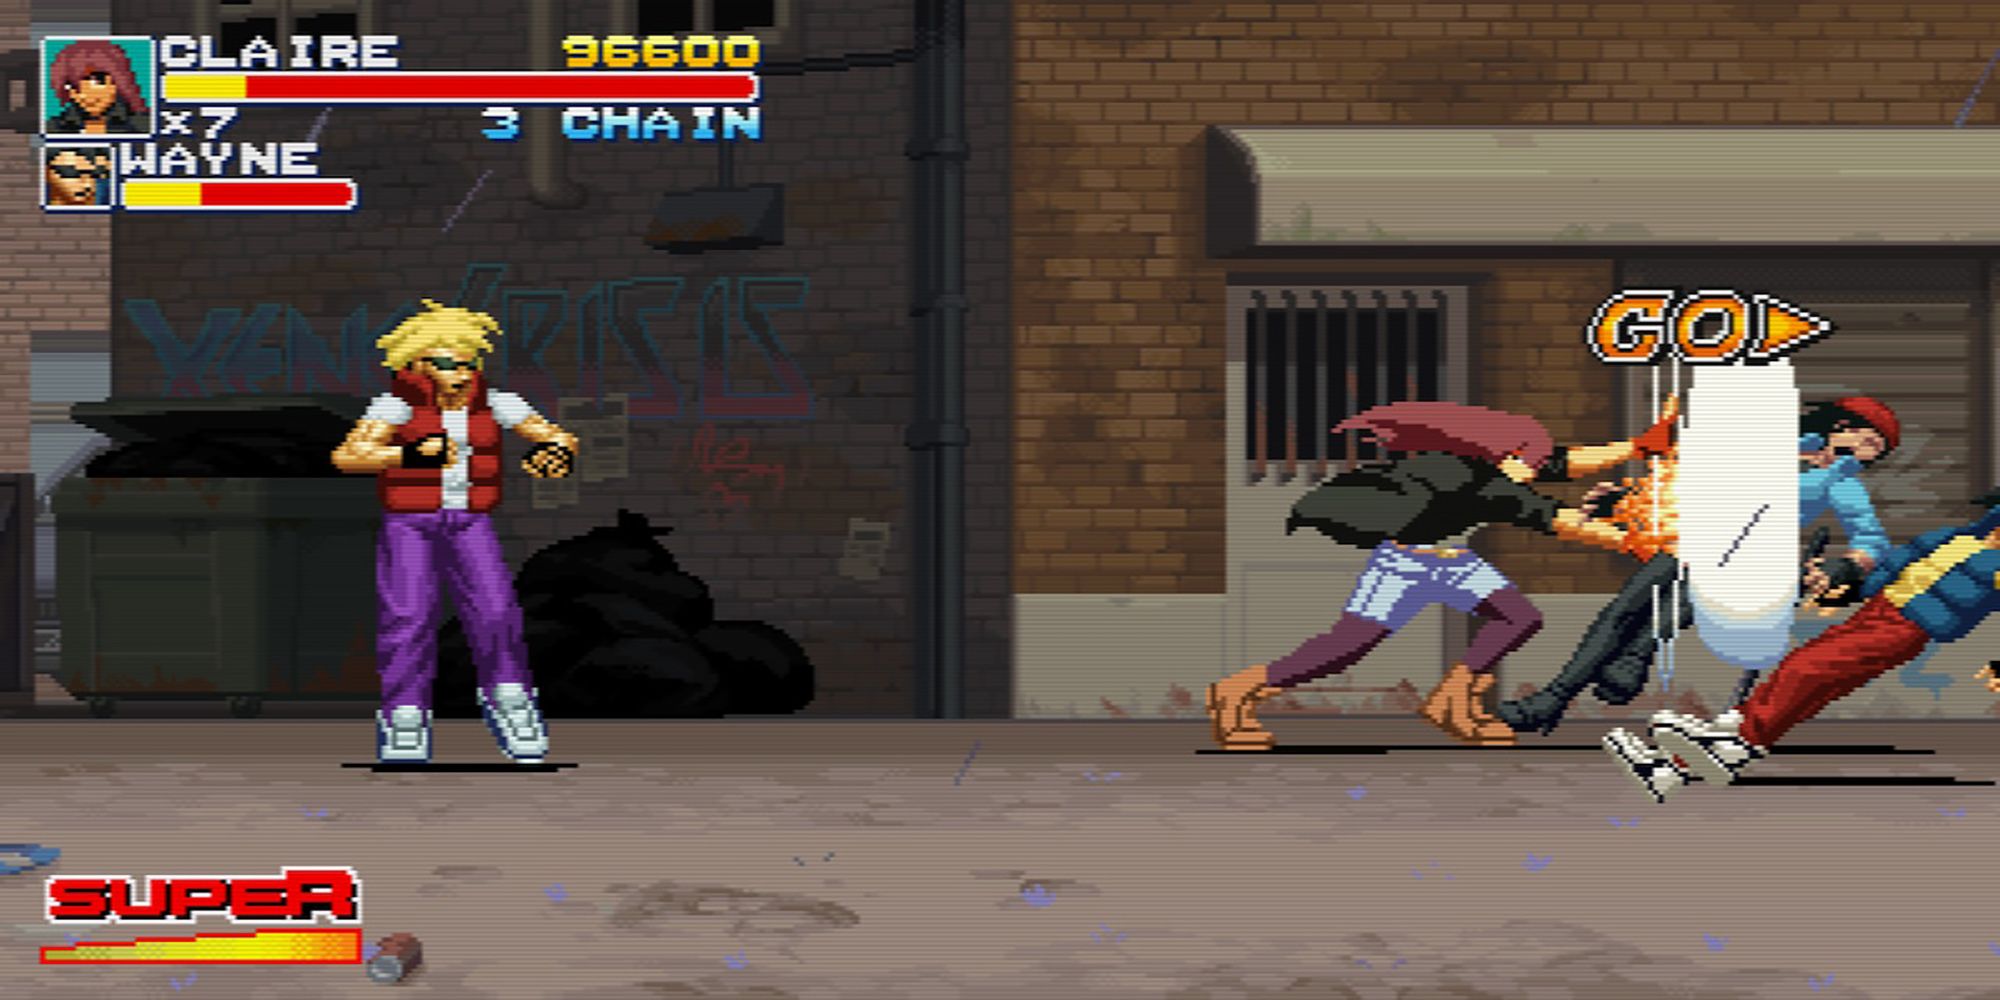 Claire knocks down Wayne and Vixen with an energy blast on the streets in Final Vendetta.